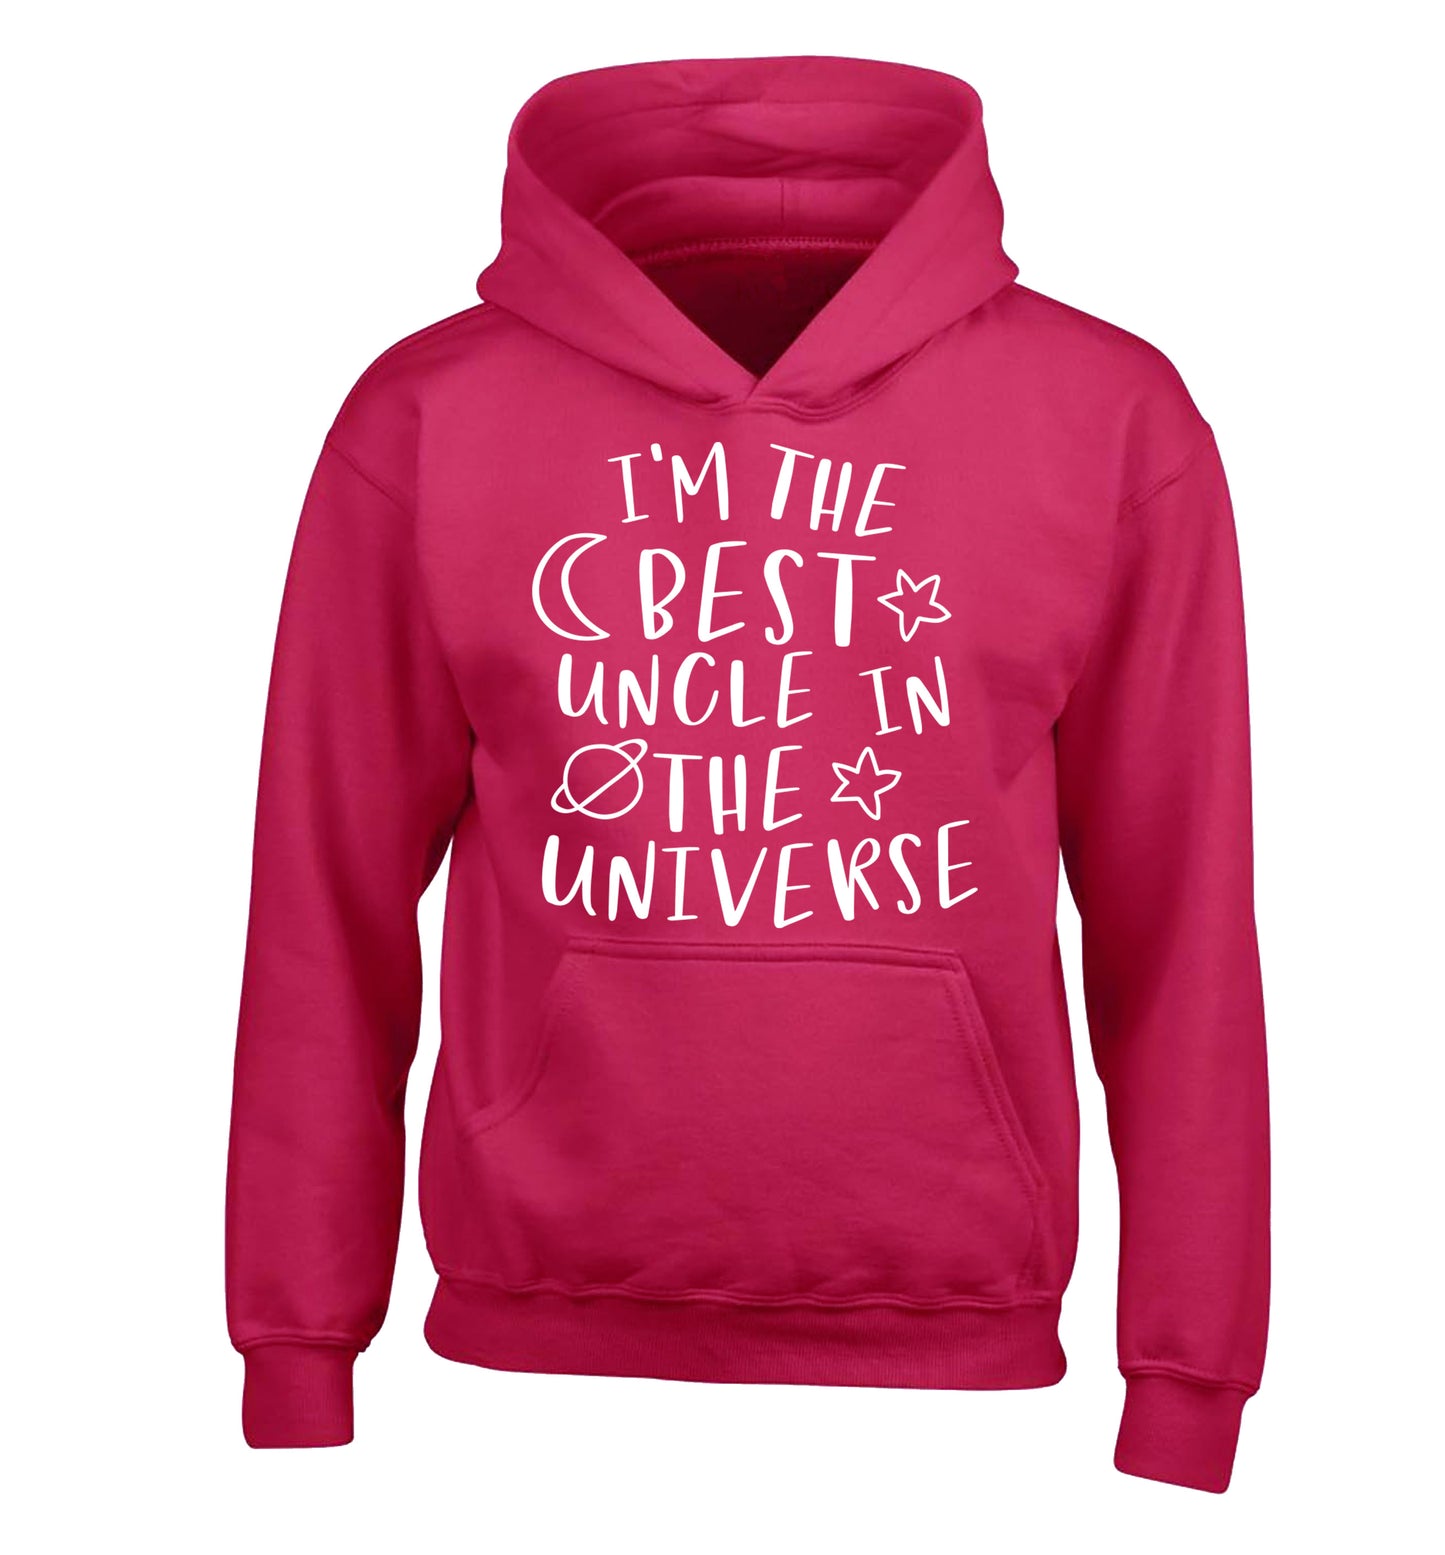 I'm the best uncle in the universe children's pink hoodie 12-13 Years